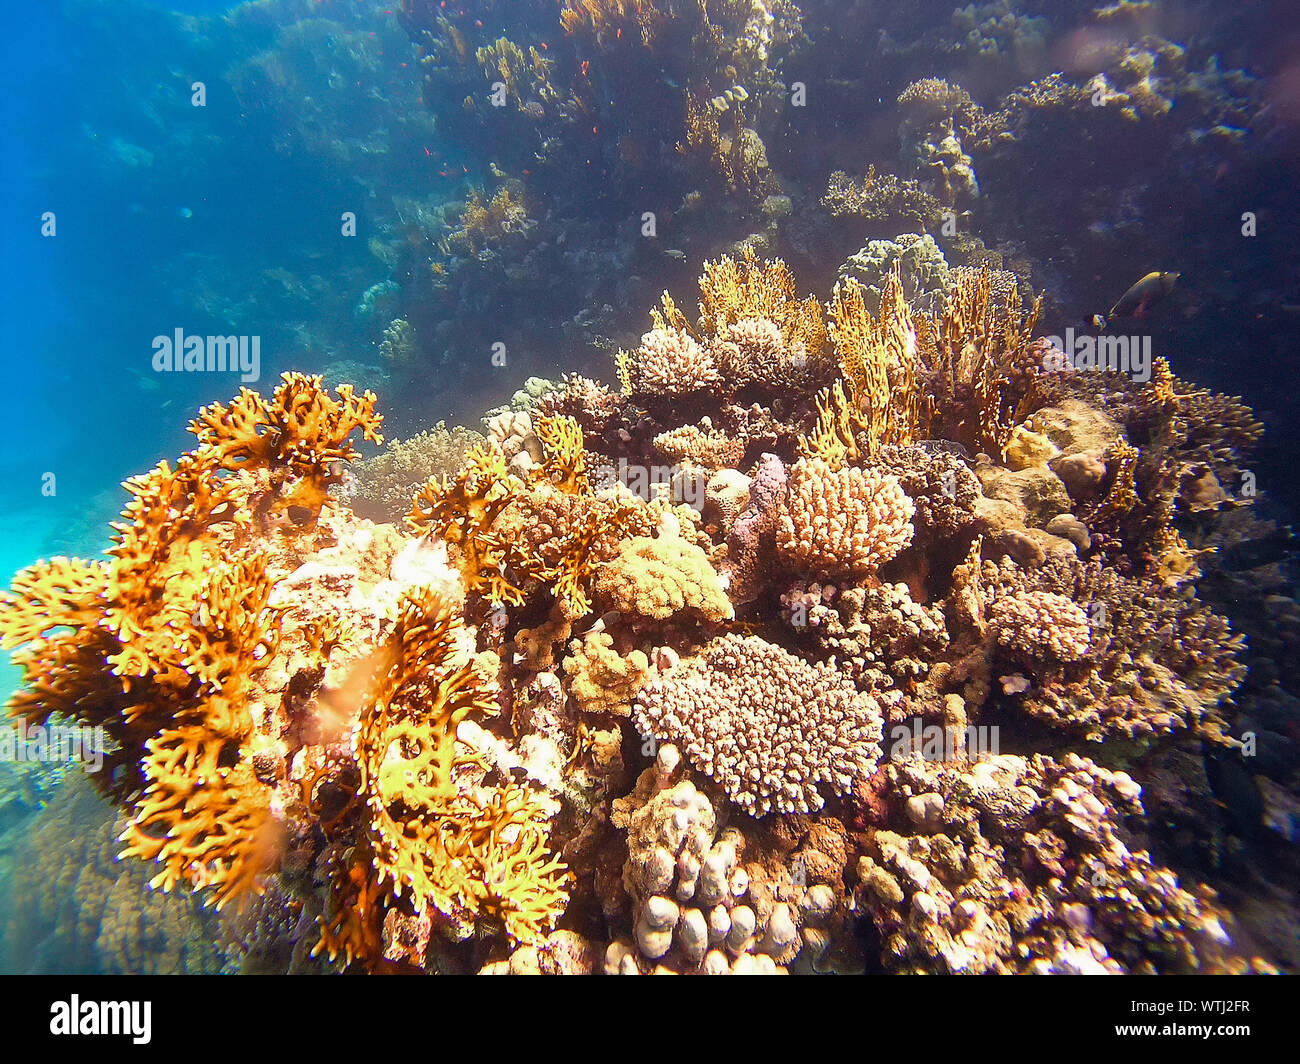 Fire Coral (Millepora) in the Red Sea Stock Photo - Alamy